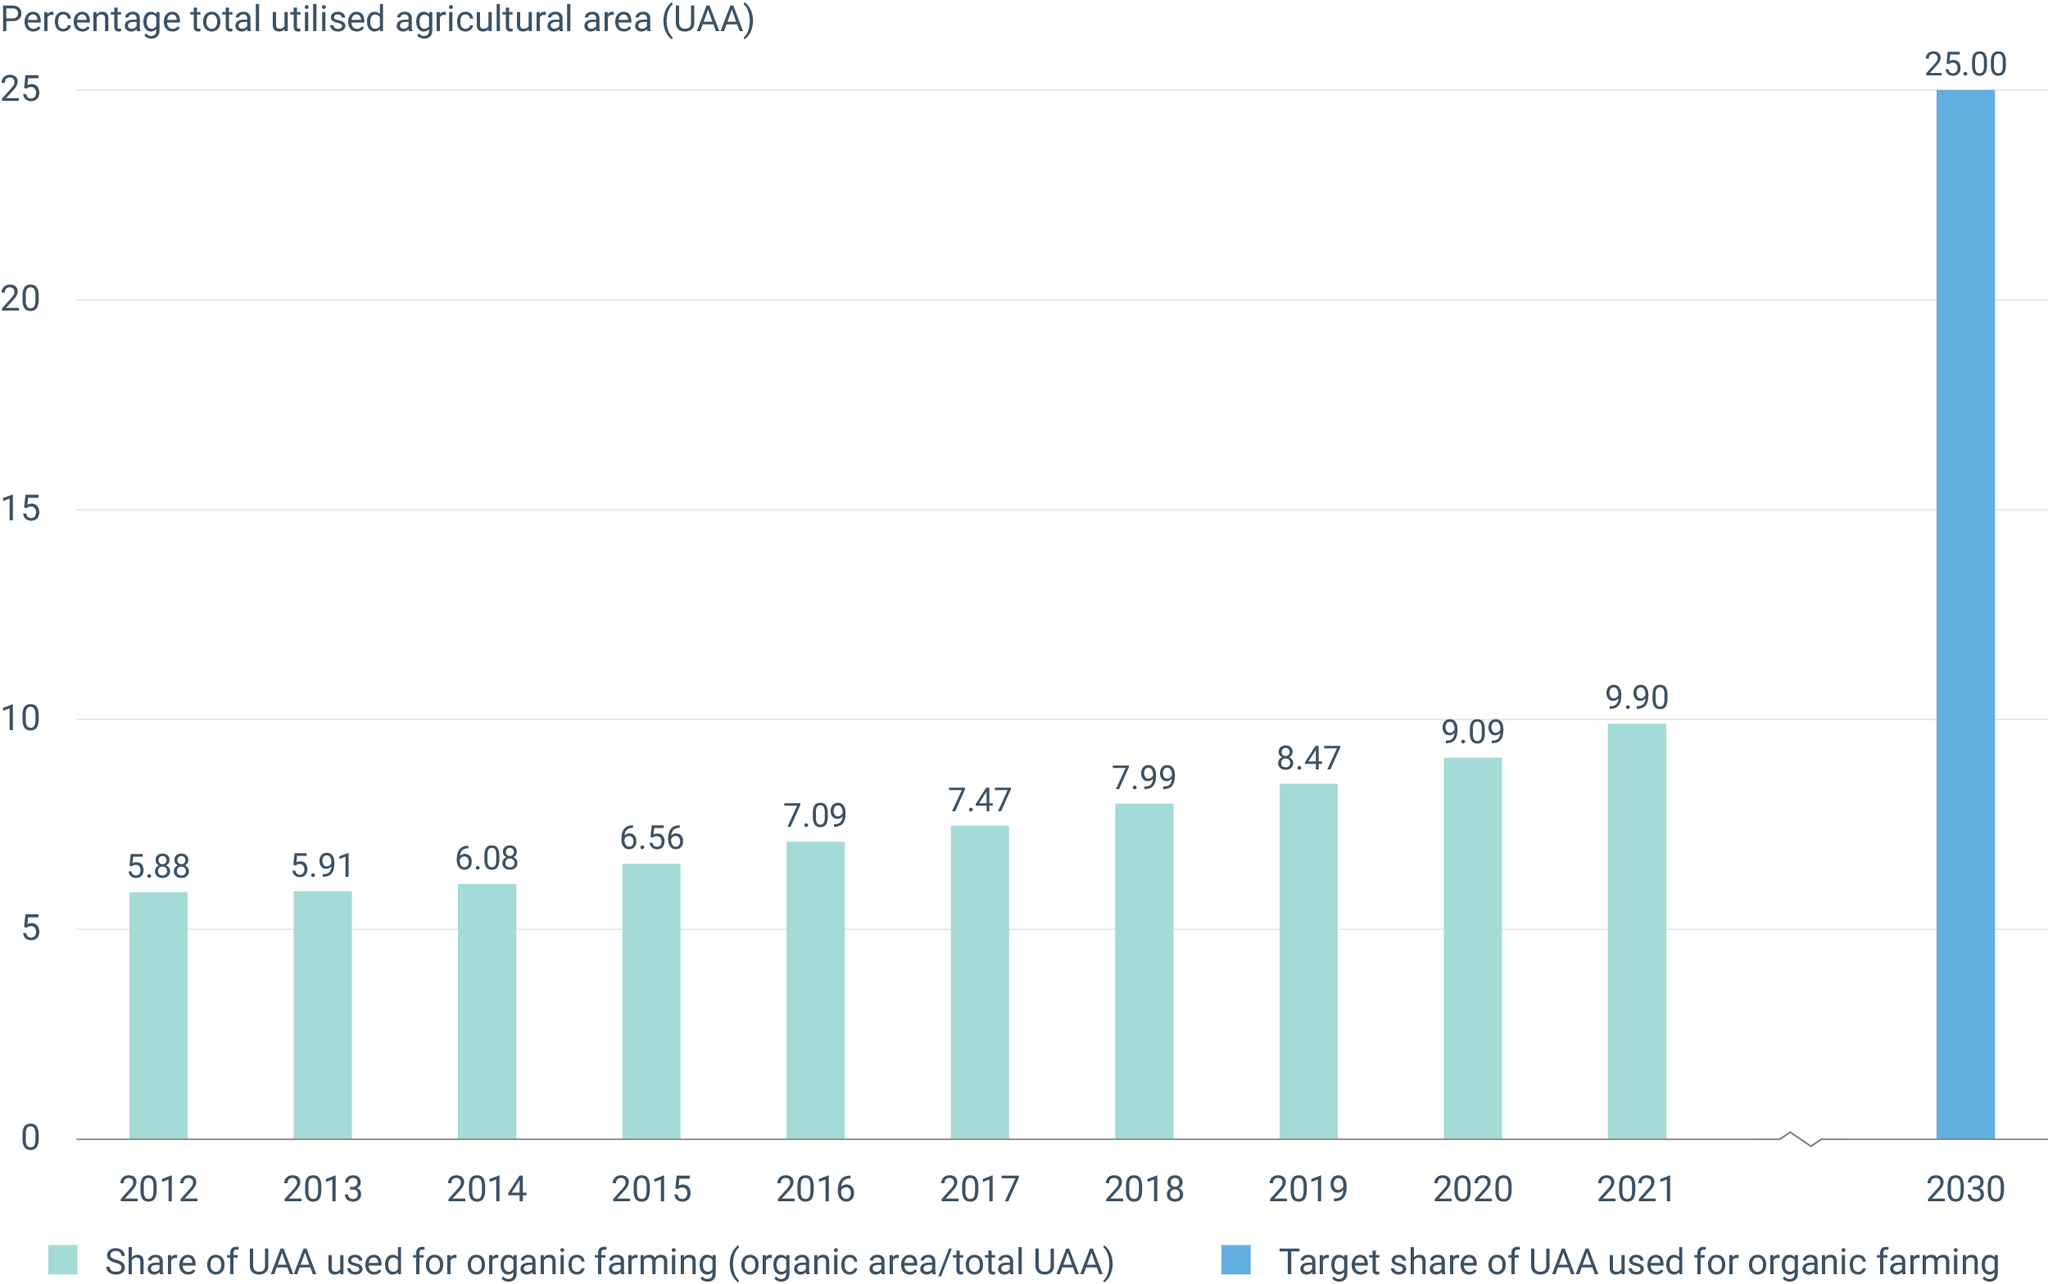 Share of the utilised agricultural area used for organic farming in the EU-27 over the period 2012-2021